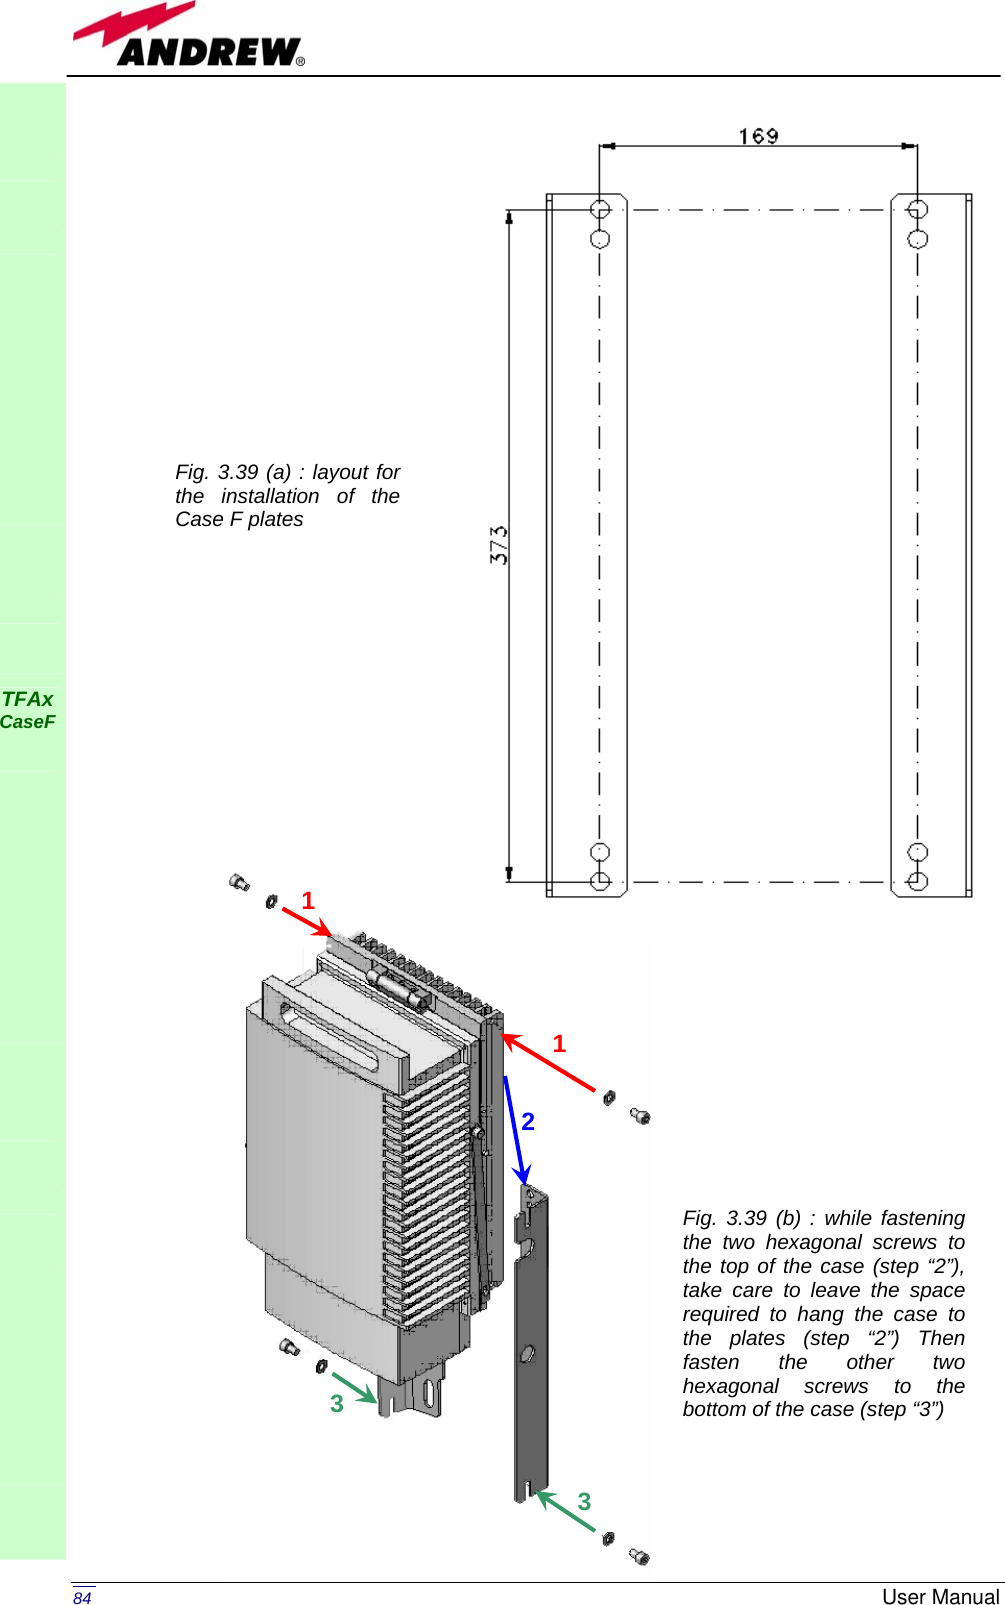   84  User Manual                                                      TFAx CaseF            Fig. 3.39 (a) : layout for the installation of the Case F plates Fig. 3.39 (b) : while fastening the two hexagonal screws to the top of the case (step “2”), take care to leave the space required to hang the case to the plates (step “2”) Then fasten the other two hexagonal screws to the bottom of the case (step “3”) 11 233 